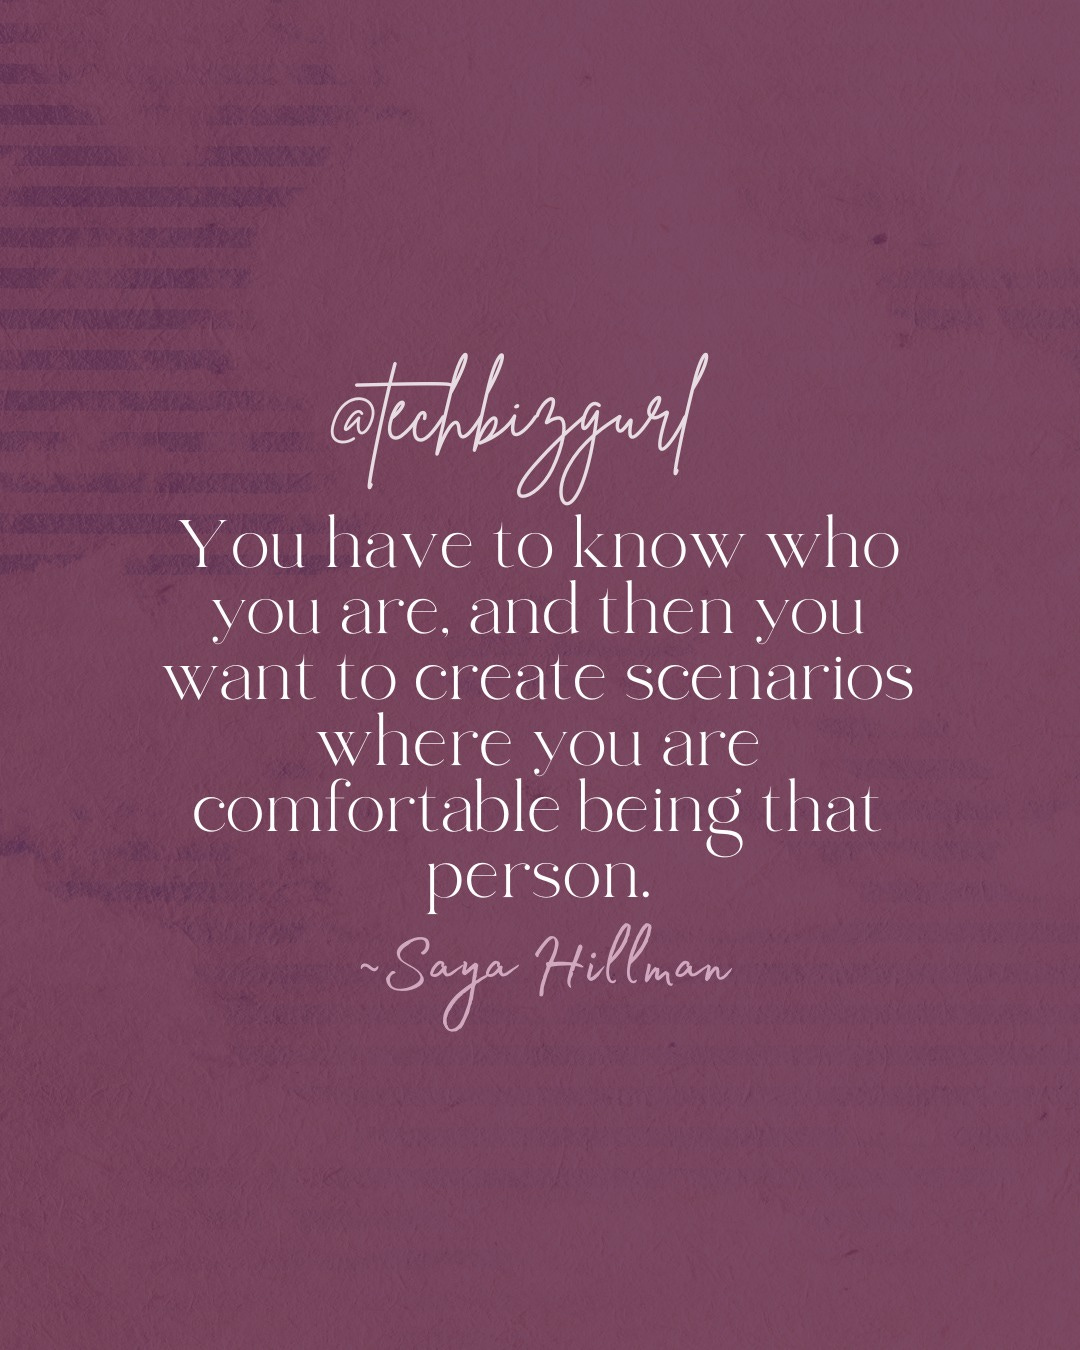 May be an image of text that says '@tuchbizgarl You have to know who you are, and then you want to create scenarios where you are comfortable being that person. ~Saya Hillman'